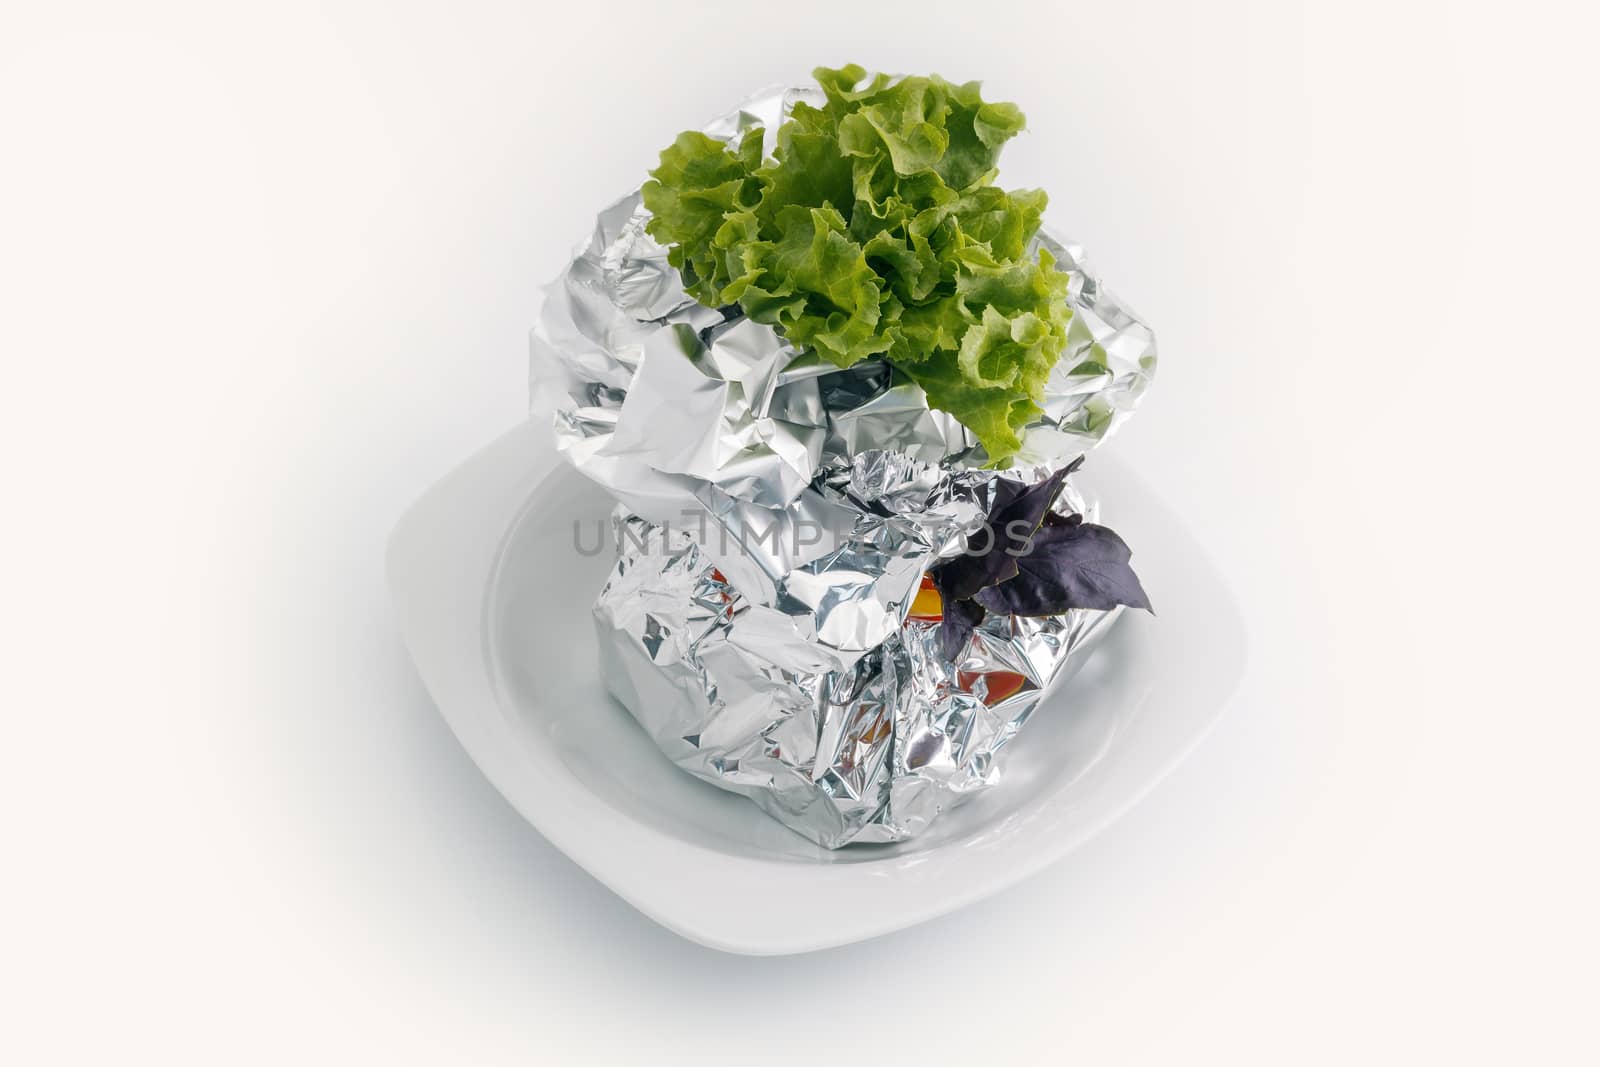 Meat with vegetables baked in aluminum foil by fogen